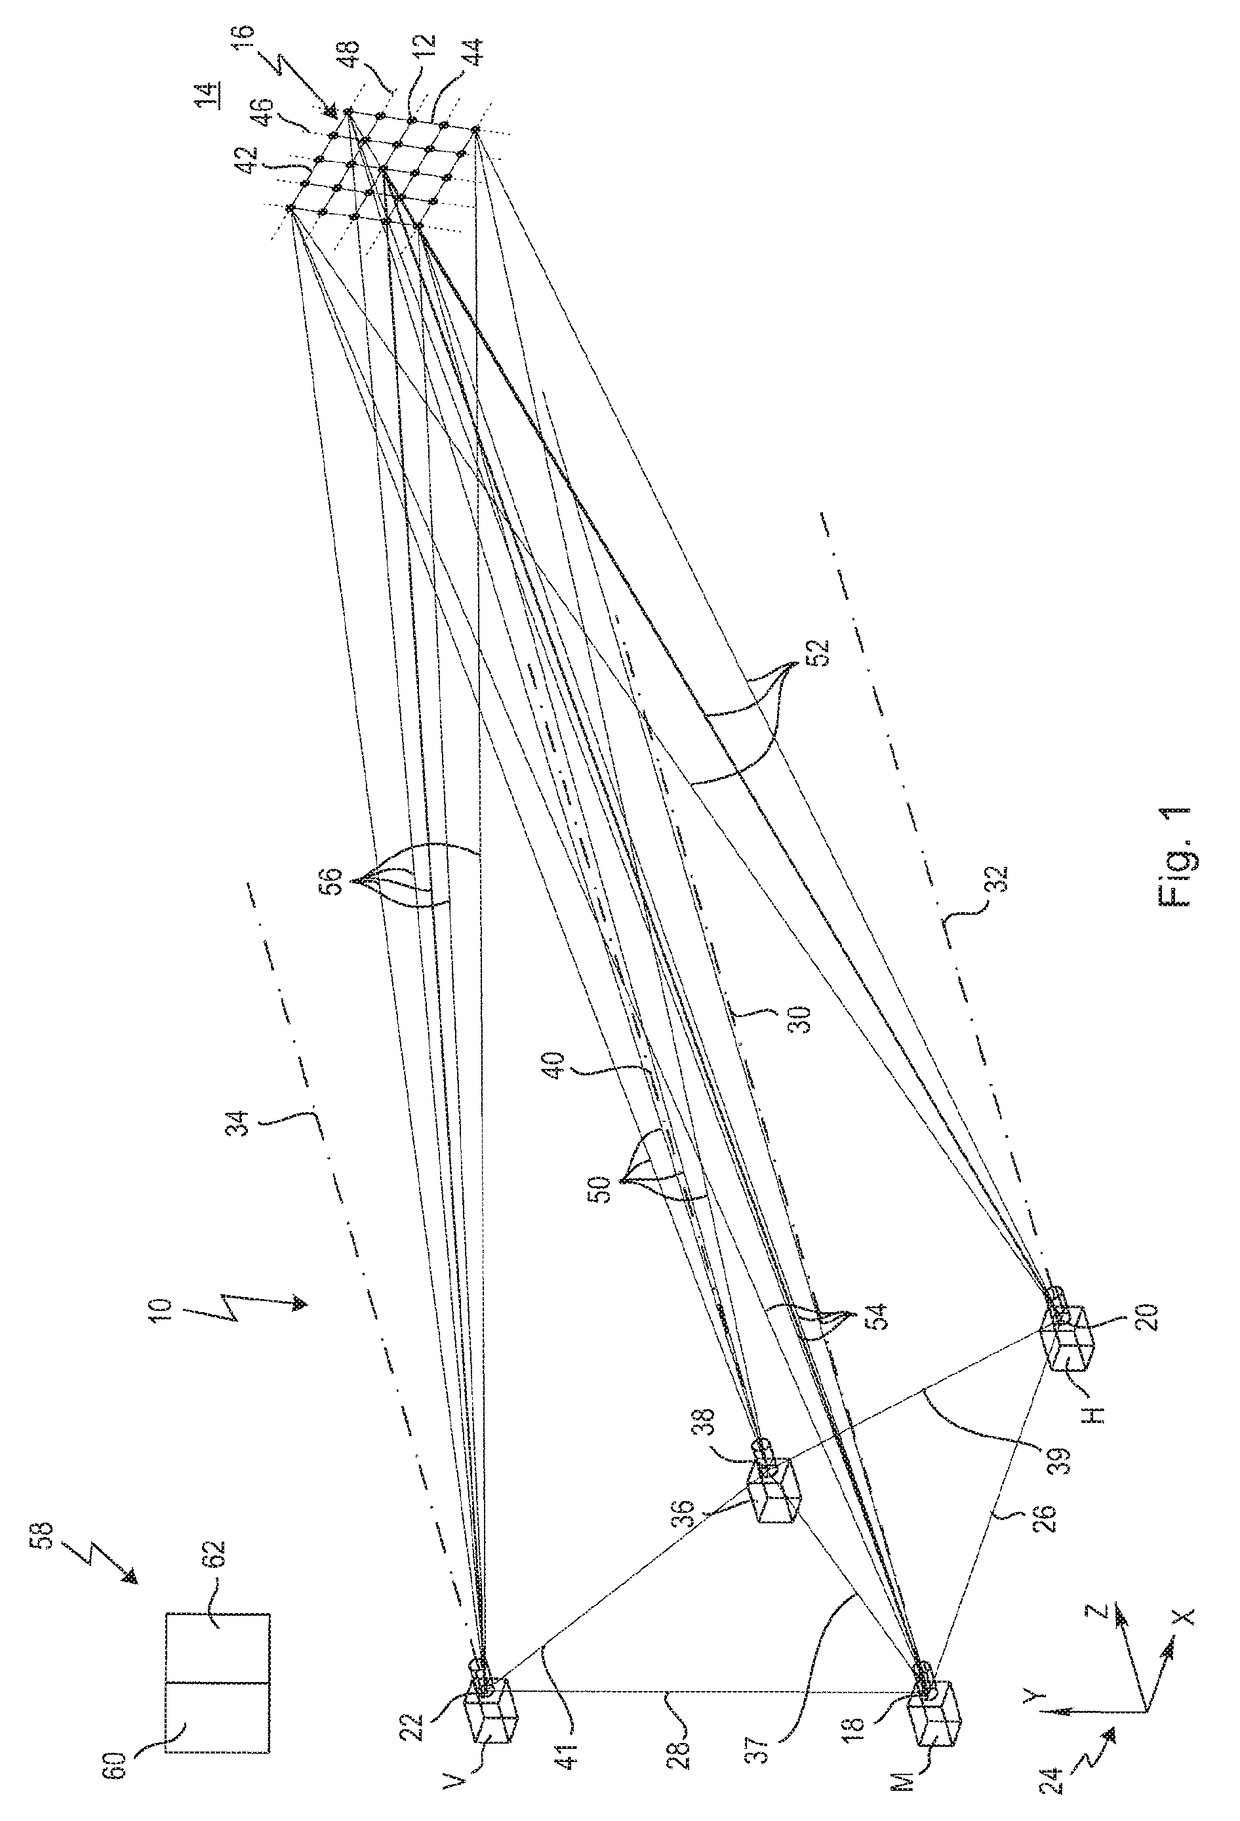 Method and apparatus for identifying structural elements of a projected structural pattern in camera images